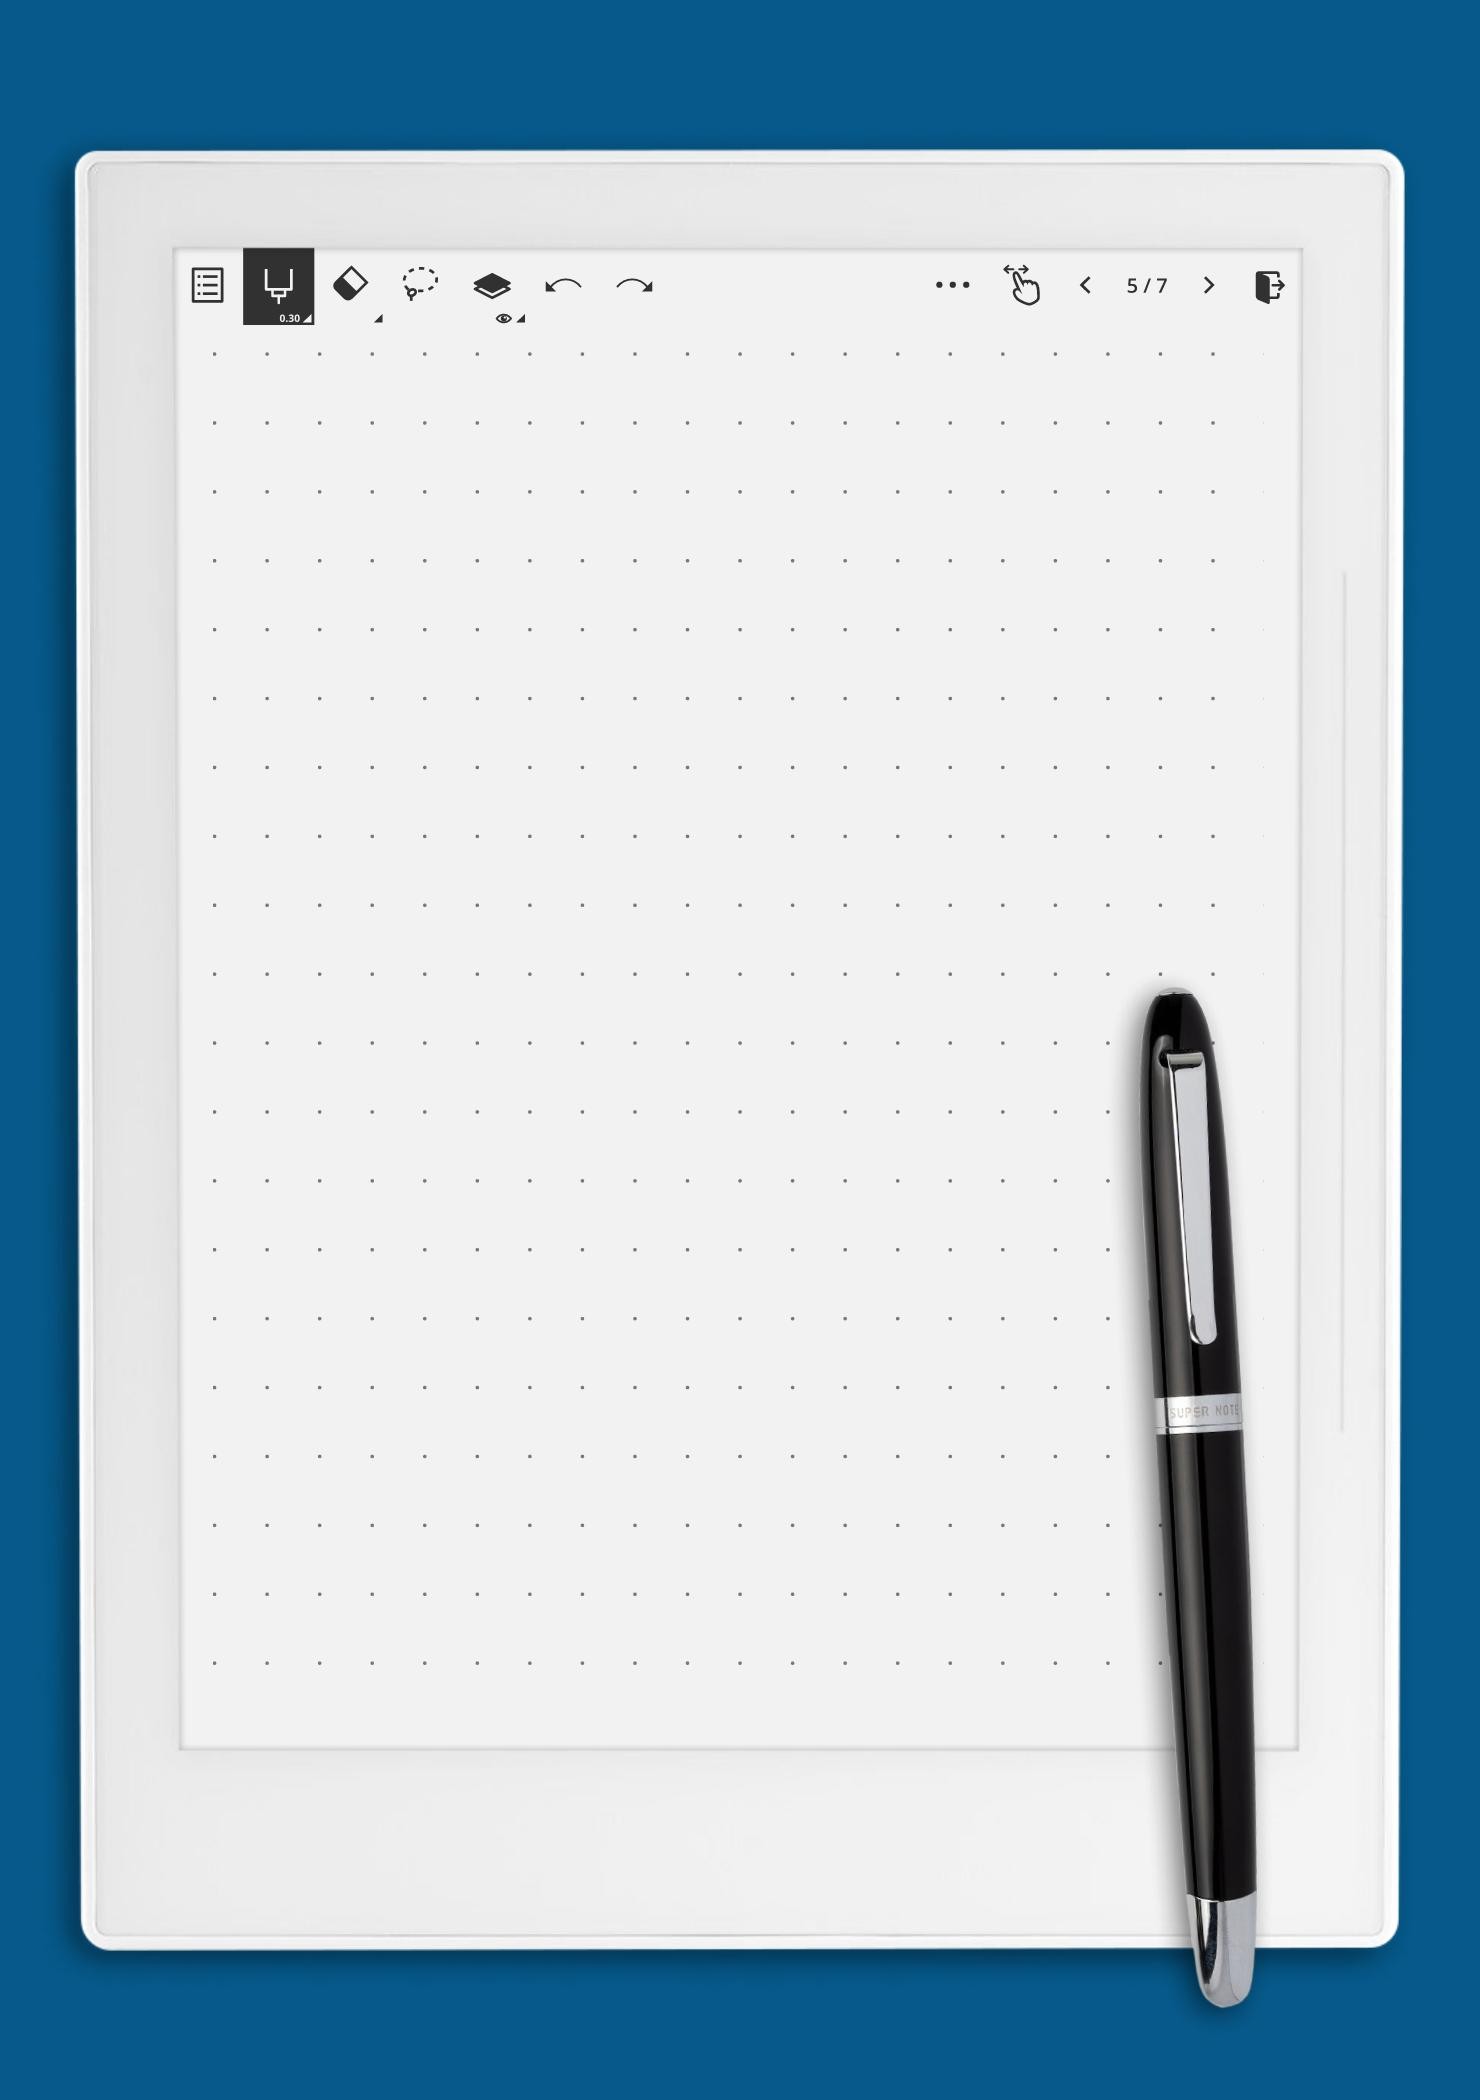 Blank & Dot Grid Paper Printable, A4/a5/letter/half Size, Instant